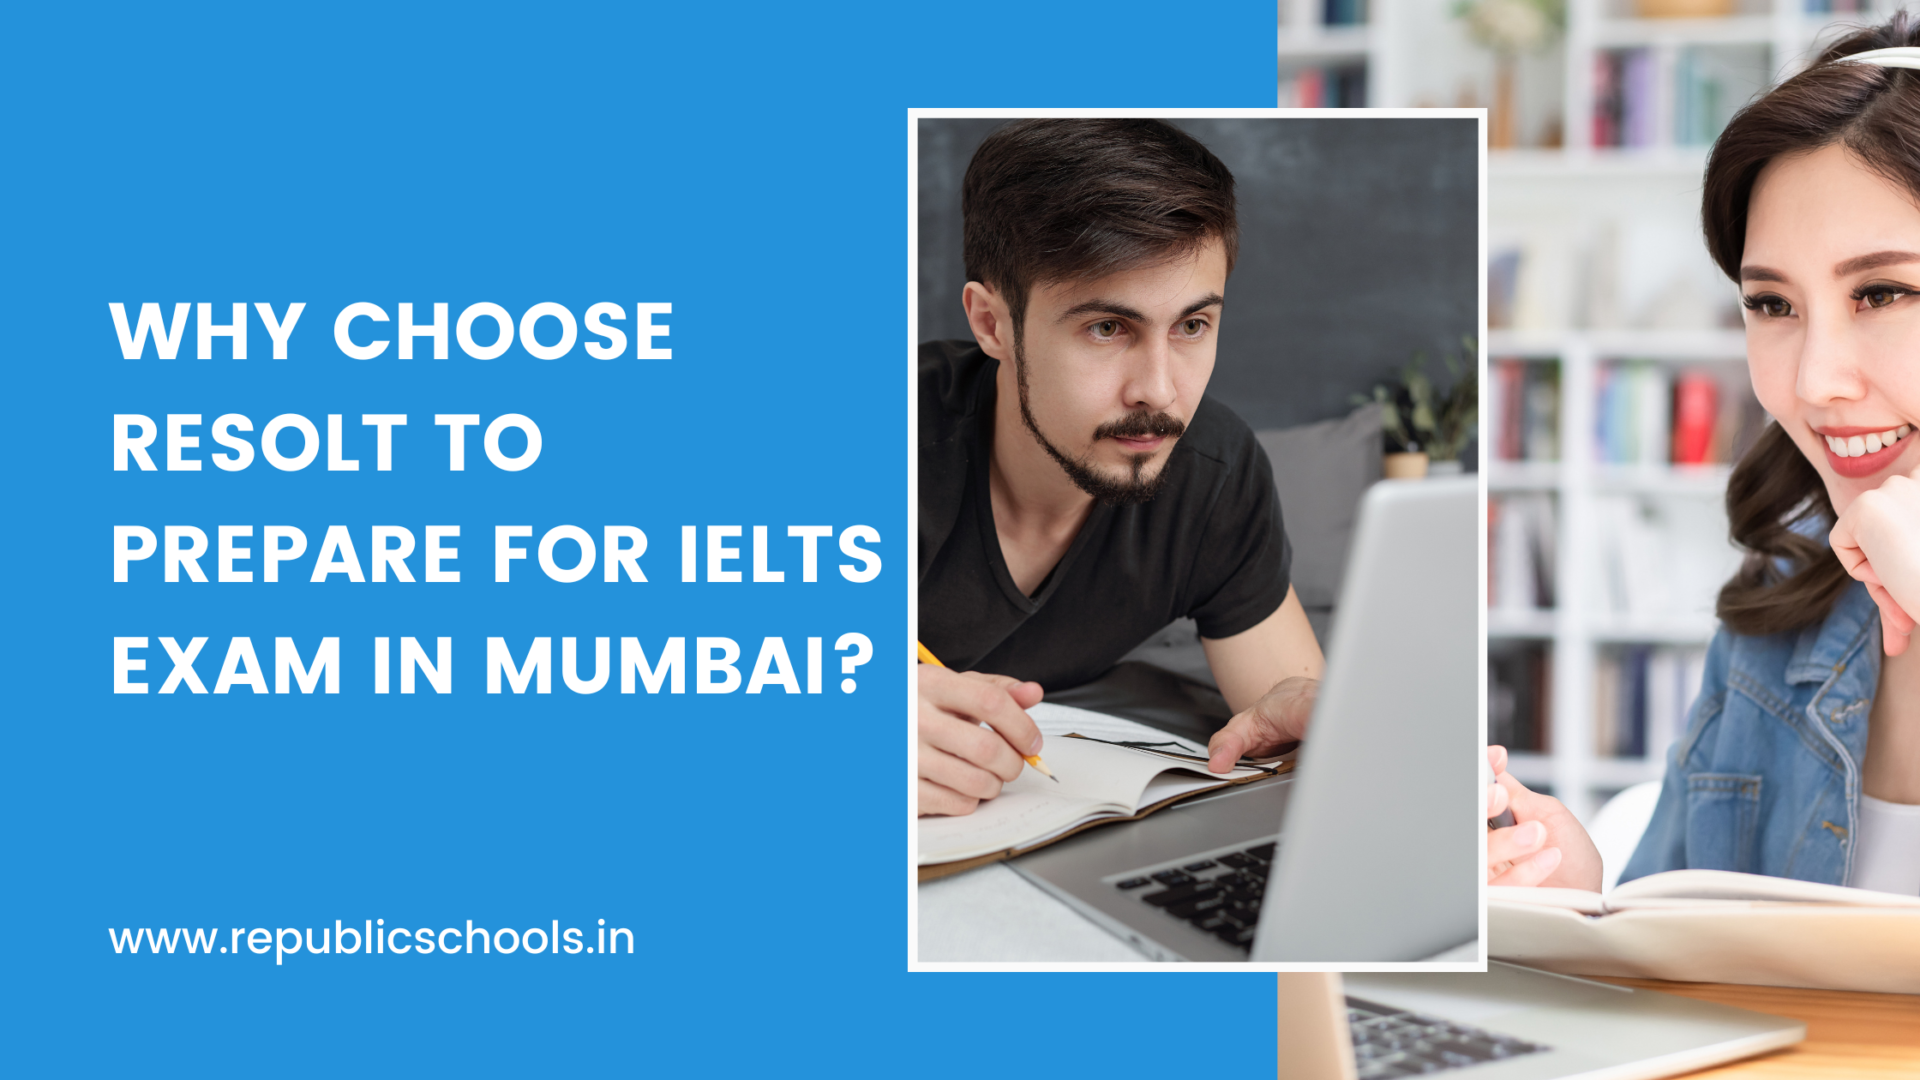 Why Choose ReSOLT To Prepare For IELTS Exam In Mumbai?